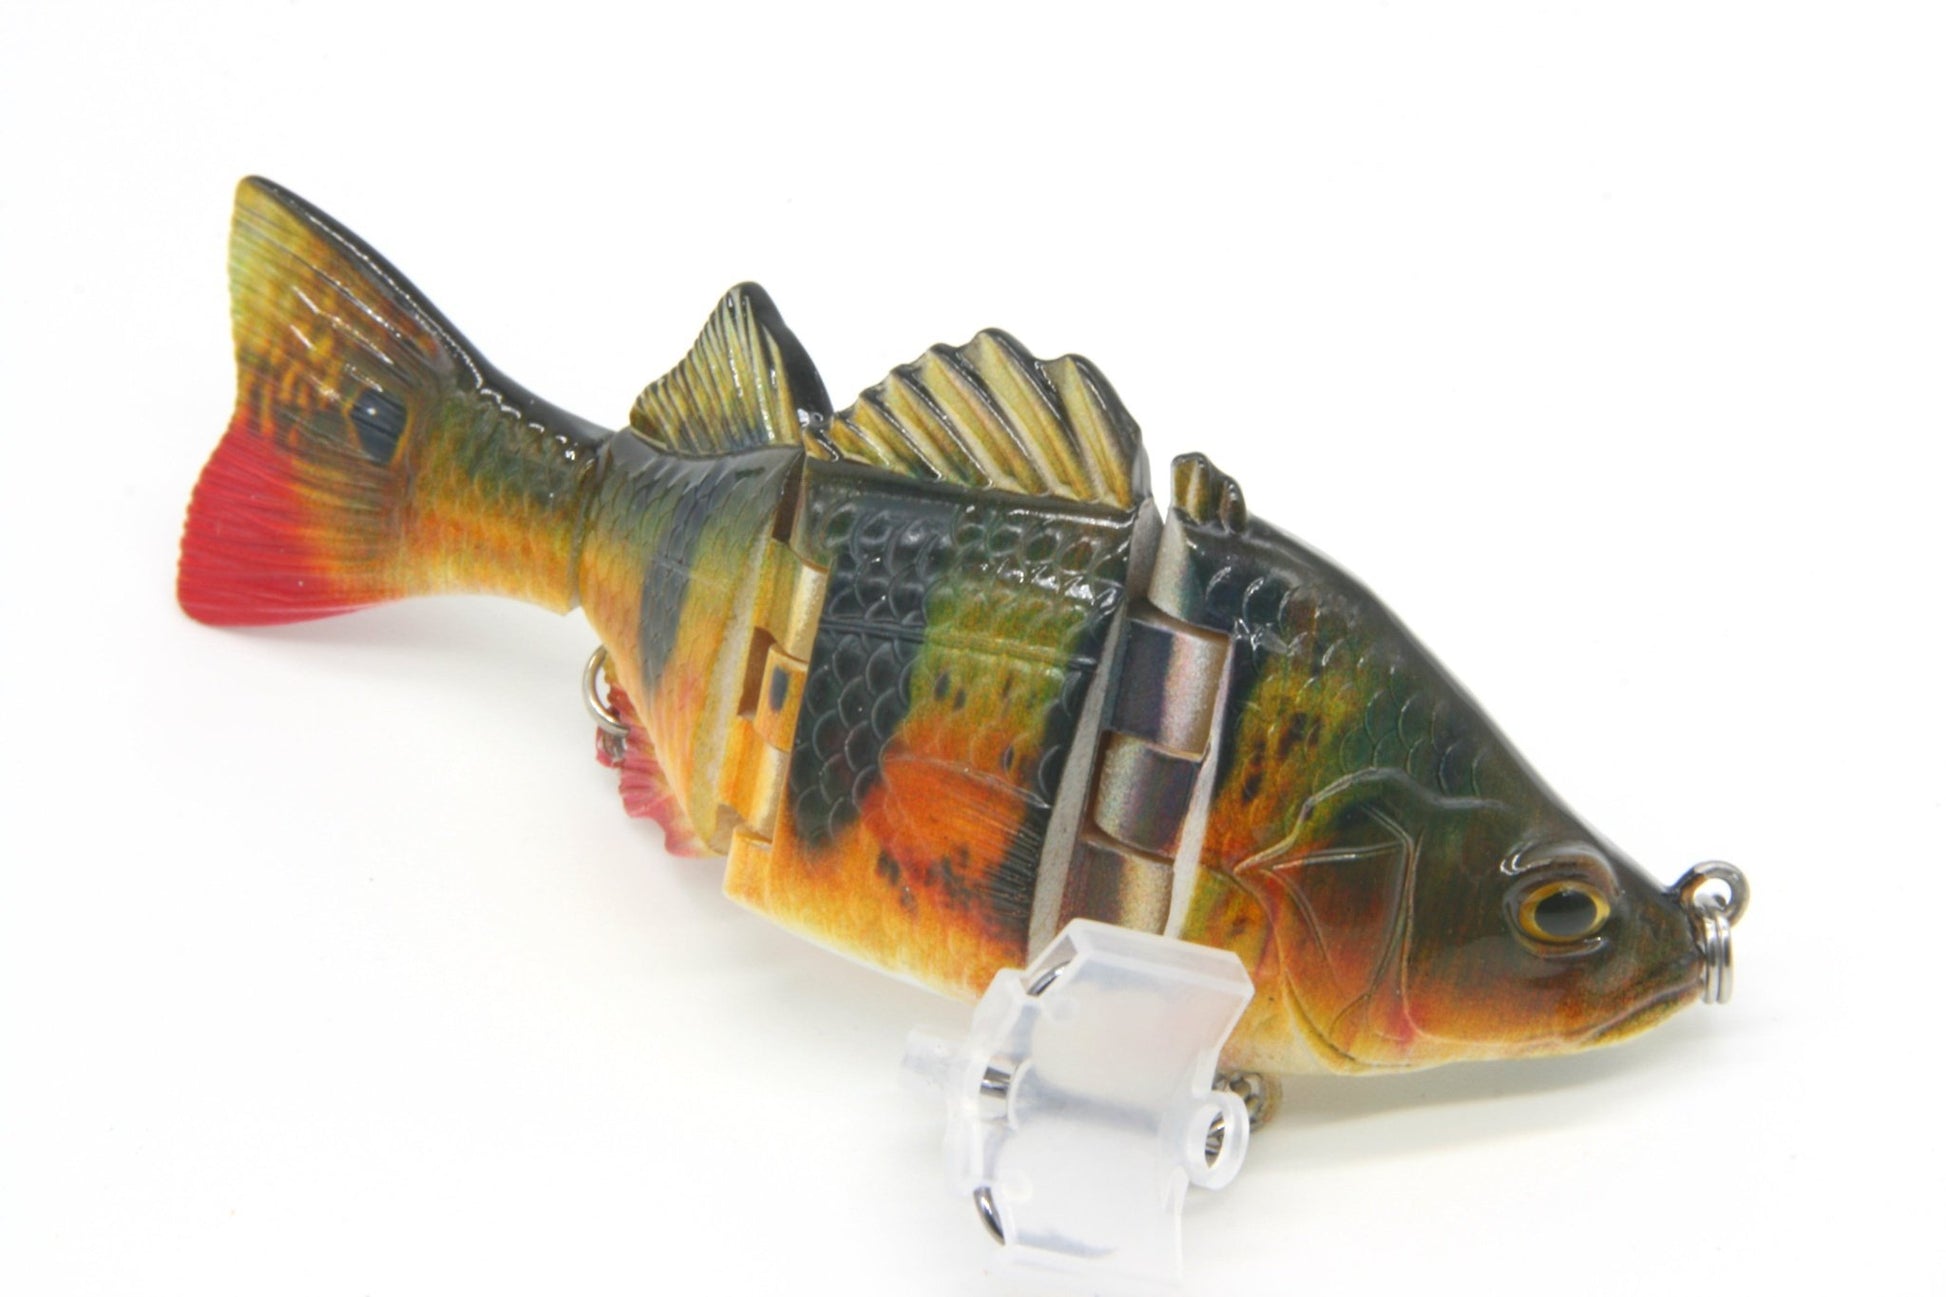 4 Perch Hard Jointed Swimbait Realistic Bait Fishing Lure